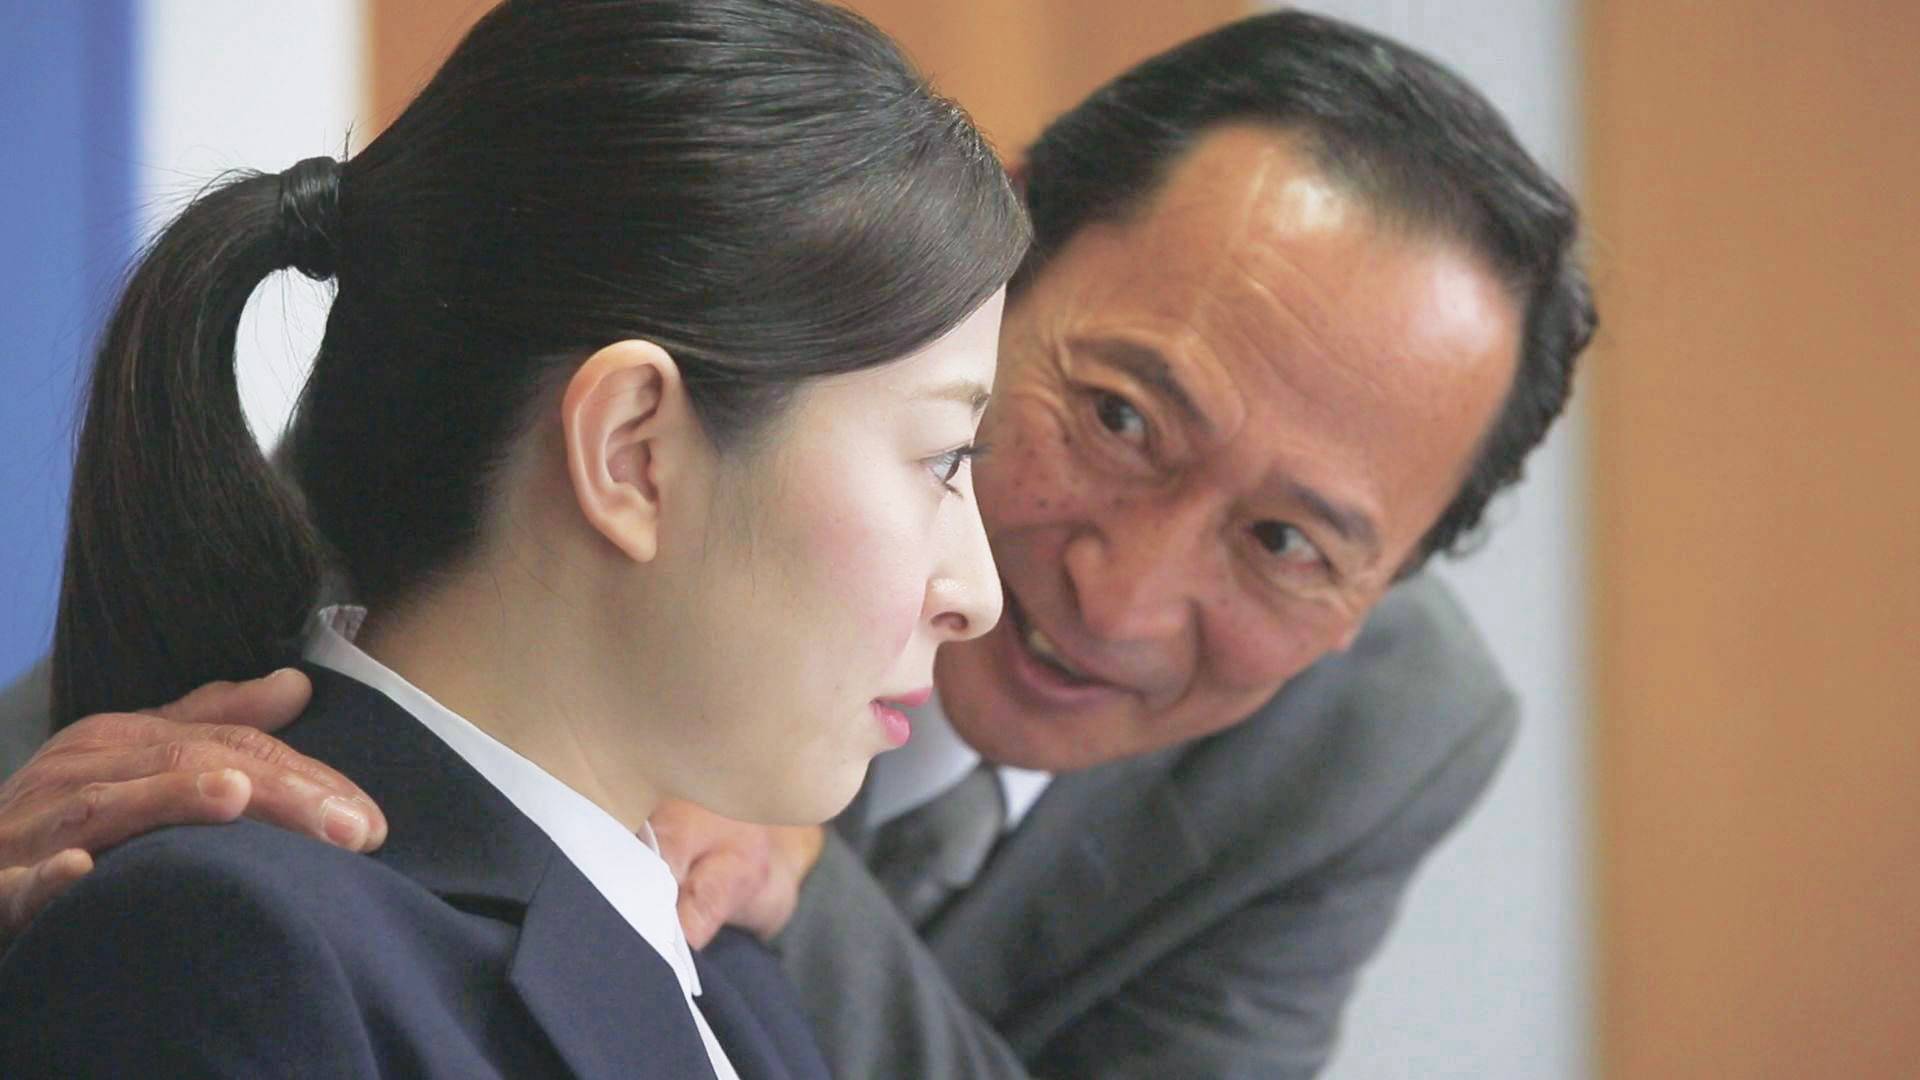 Japans government releases video to help eradicate harassment from politics pic